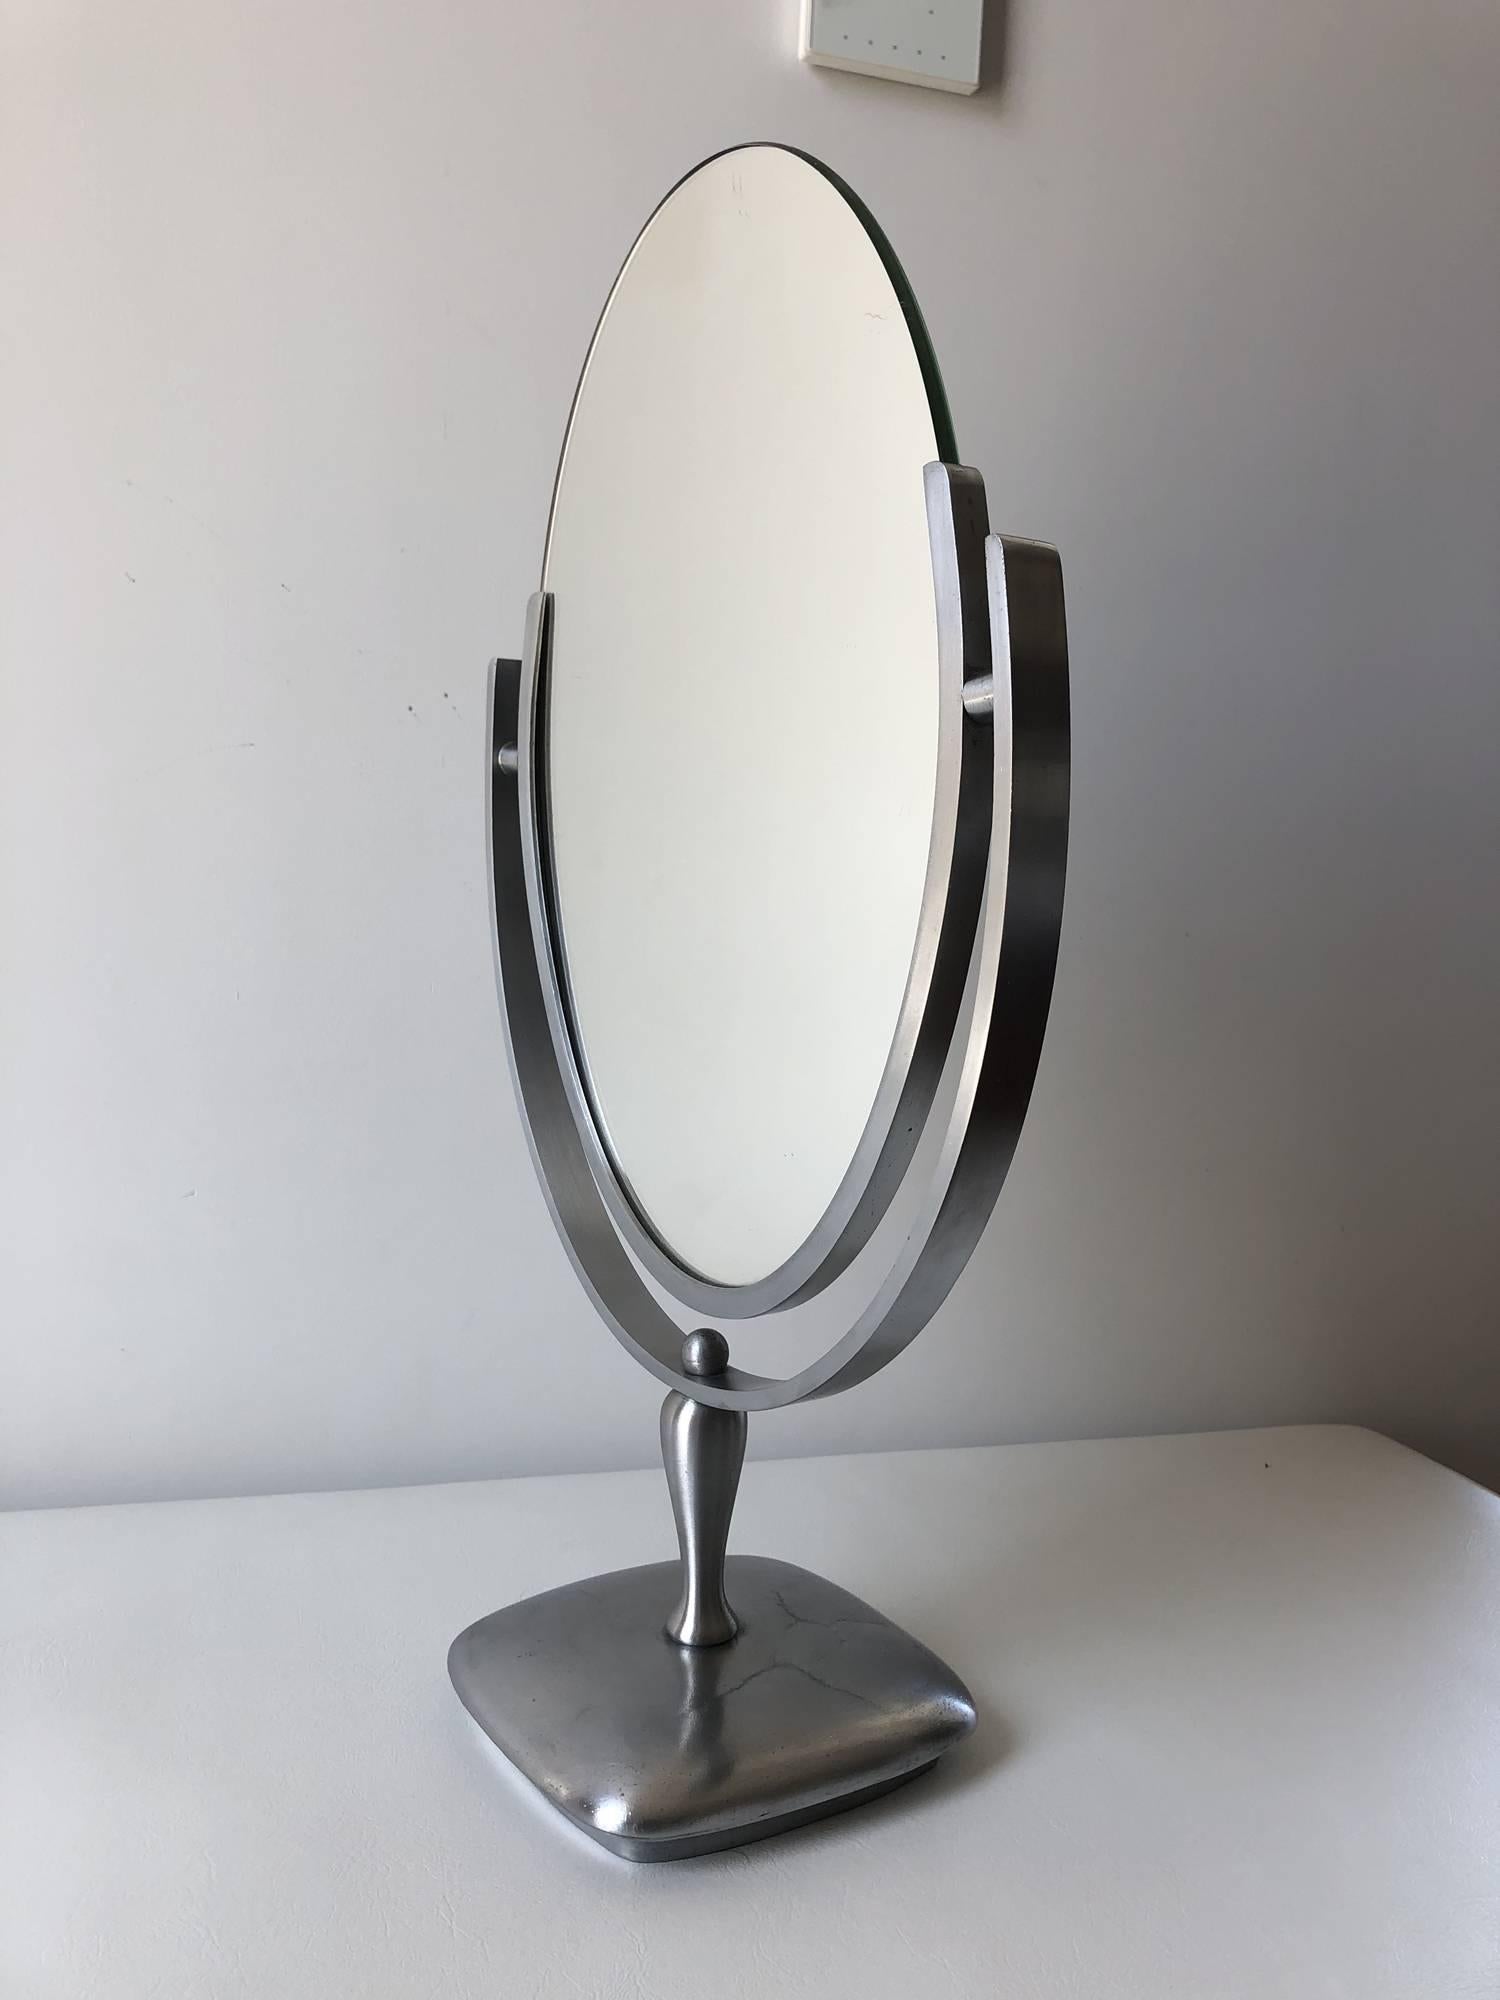 Beautiful oval mirror designed and manufactured by Charles Hollis Jones in the 1960s. The mirror has a satin metal frame and base, the mirror has a beveled finished and is in excellent condition.

The piece is signed and dated by the